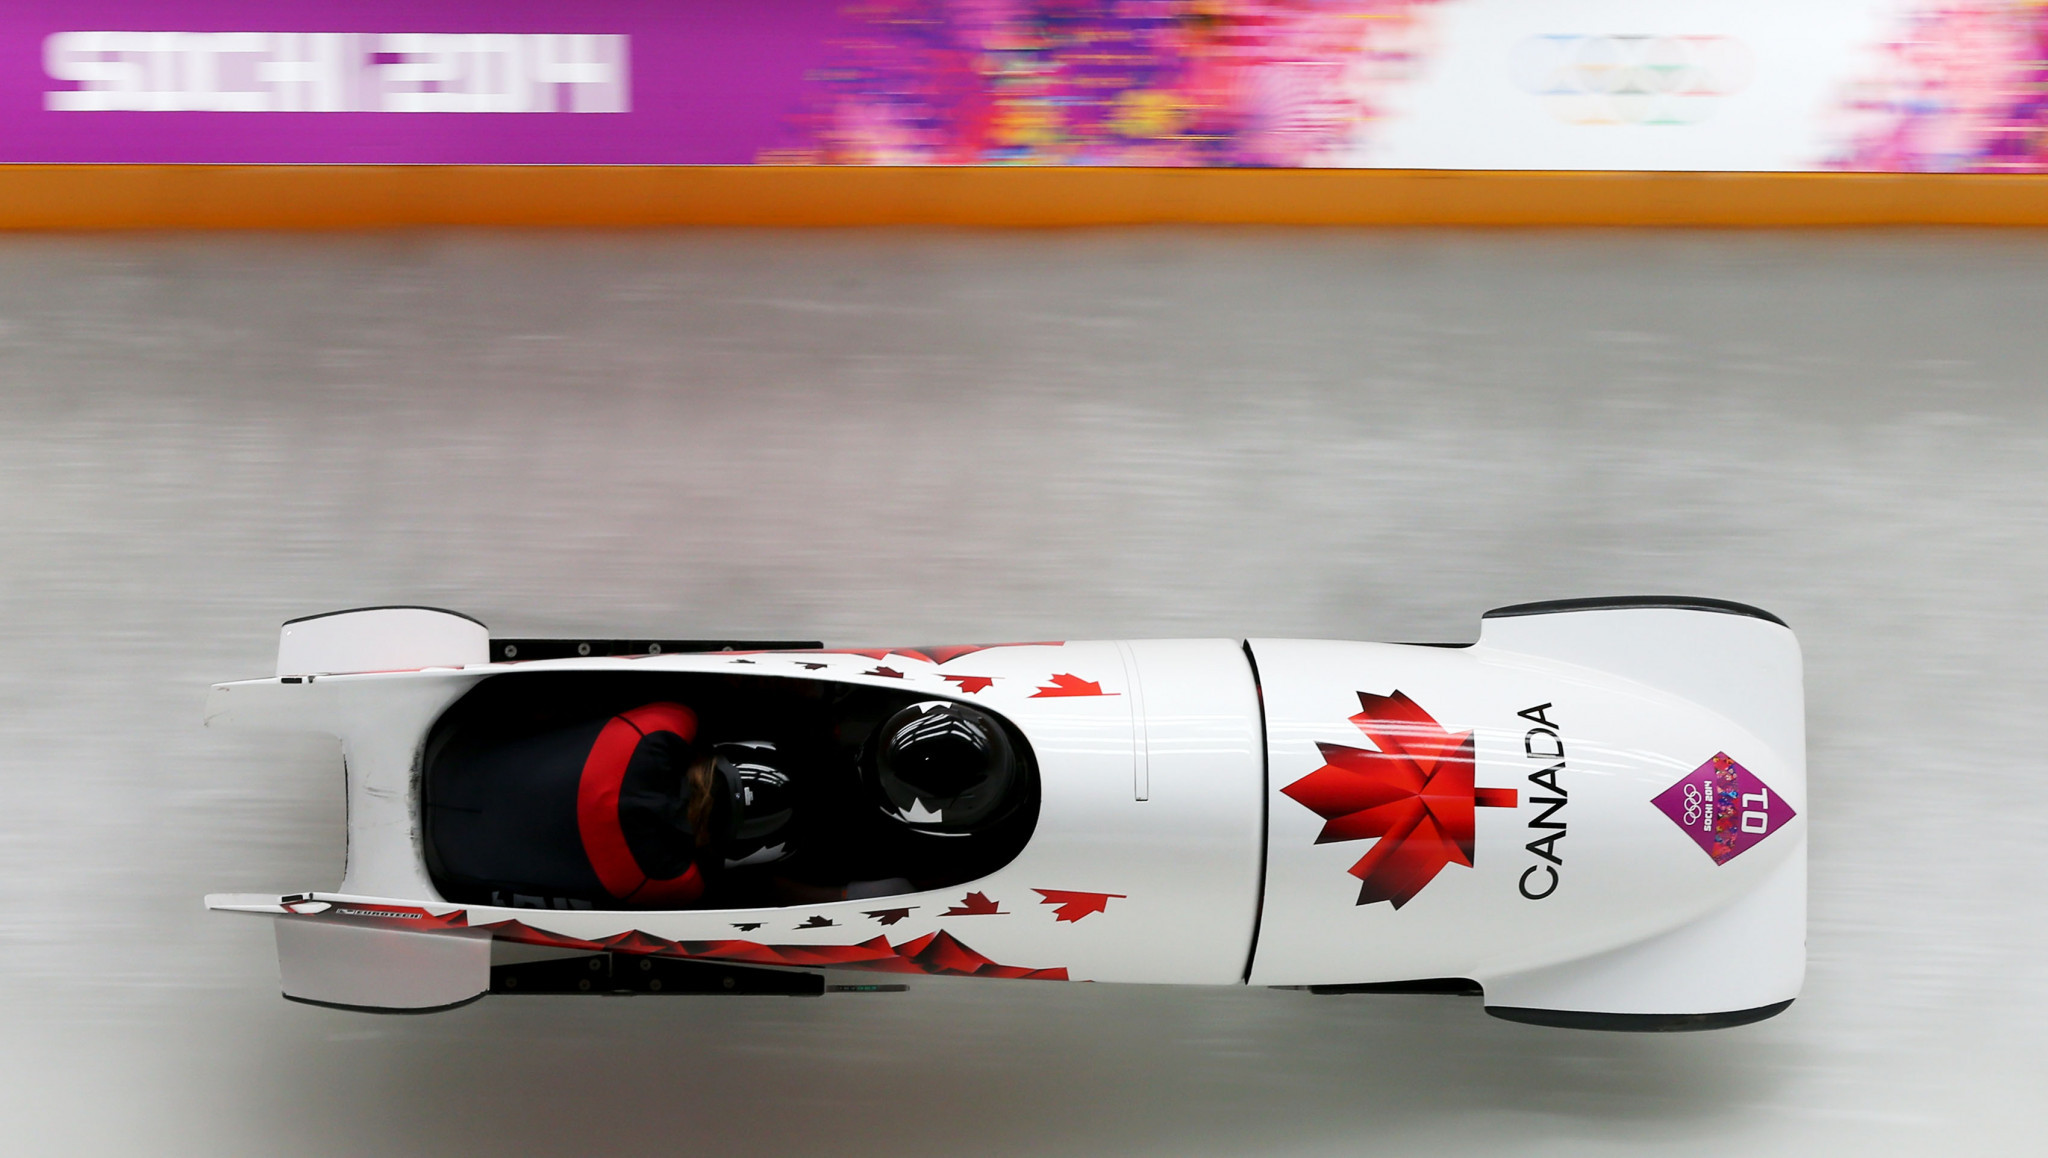 Kaillie Humphries won two gold medals competing for Canada before switching nationality after alleging verbal and emotional abuse by head coach Todd Hays and a lack of support from senior BCS officials ©Getty Images